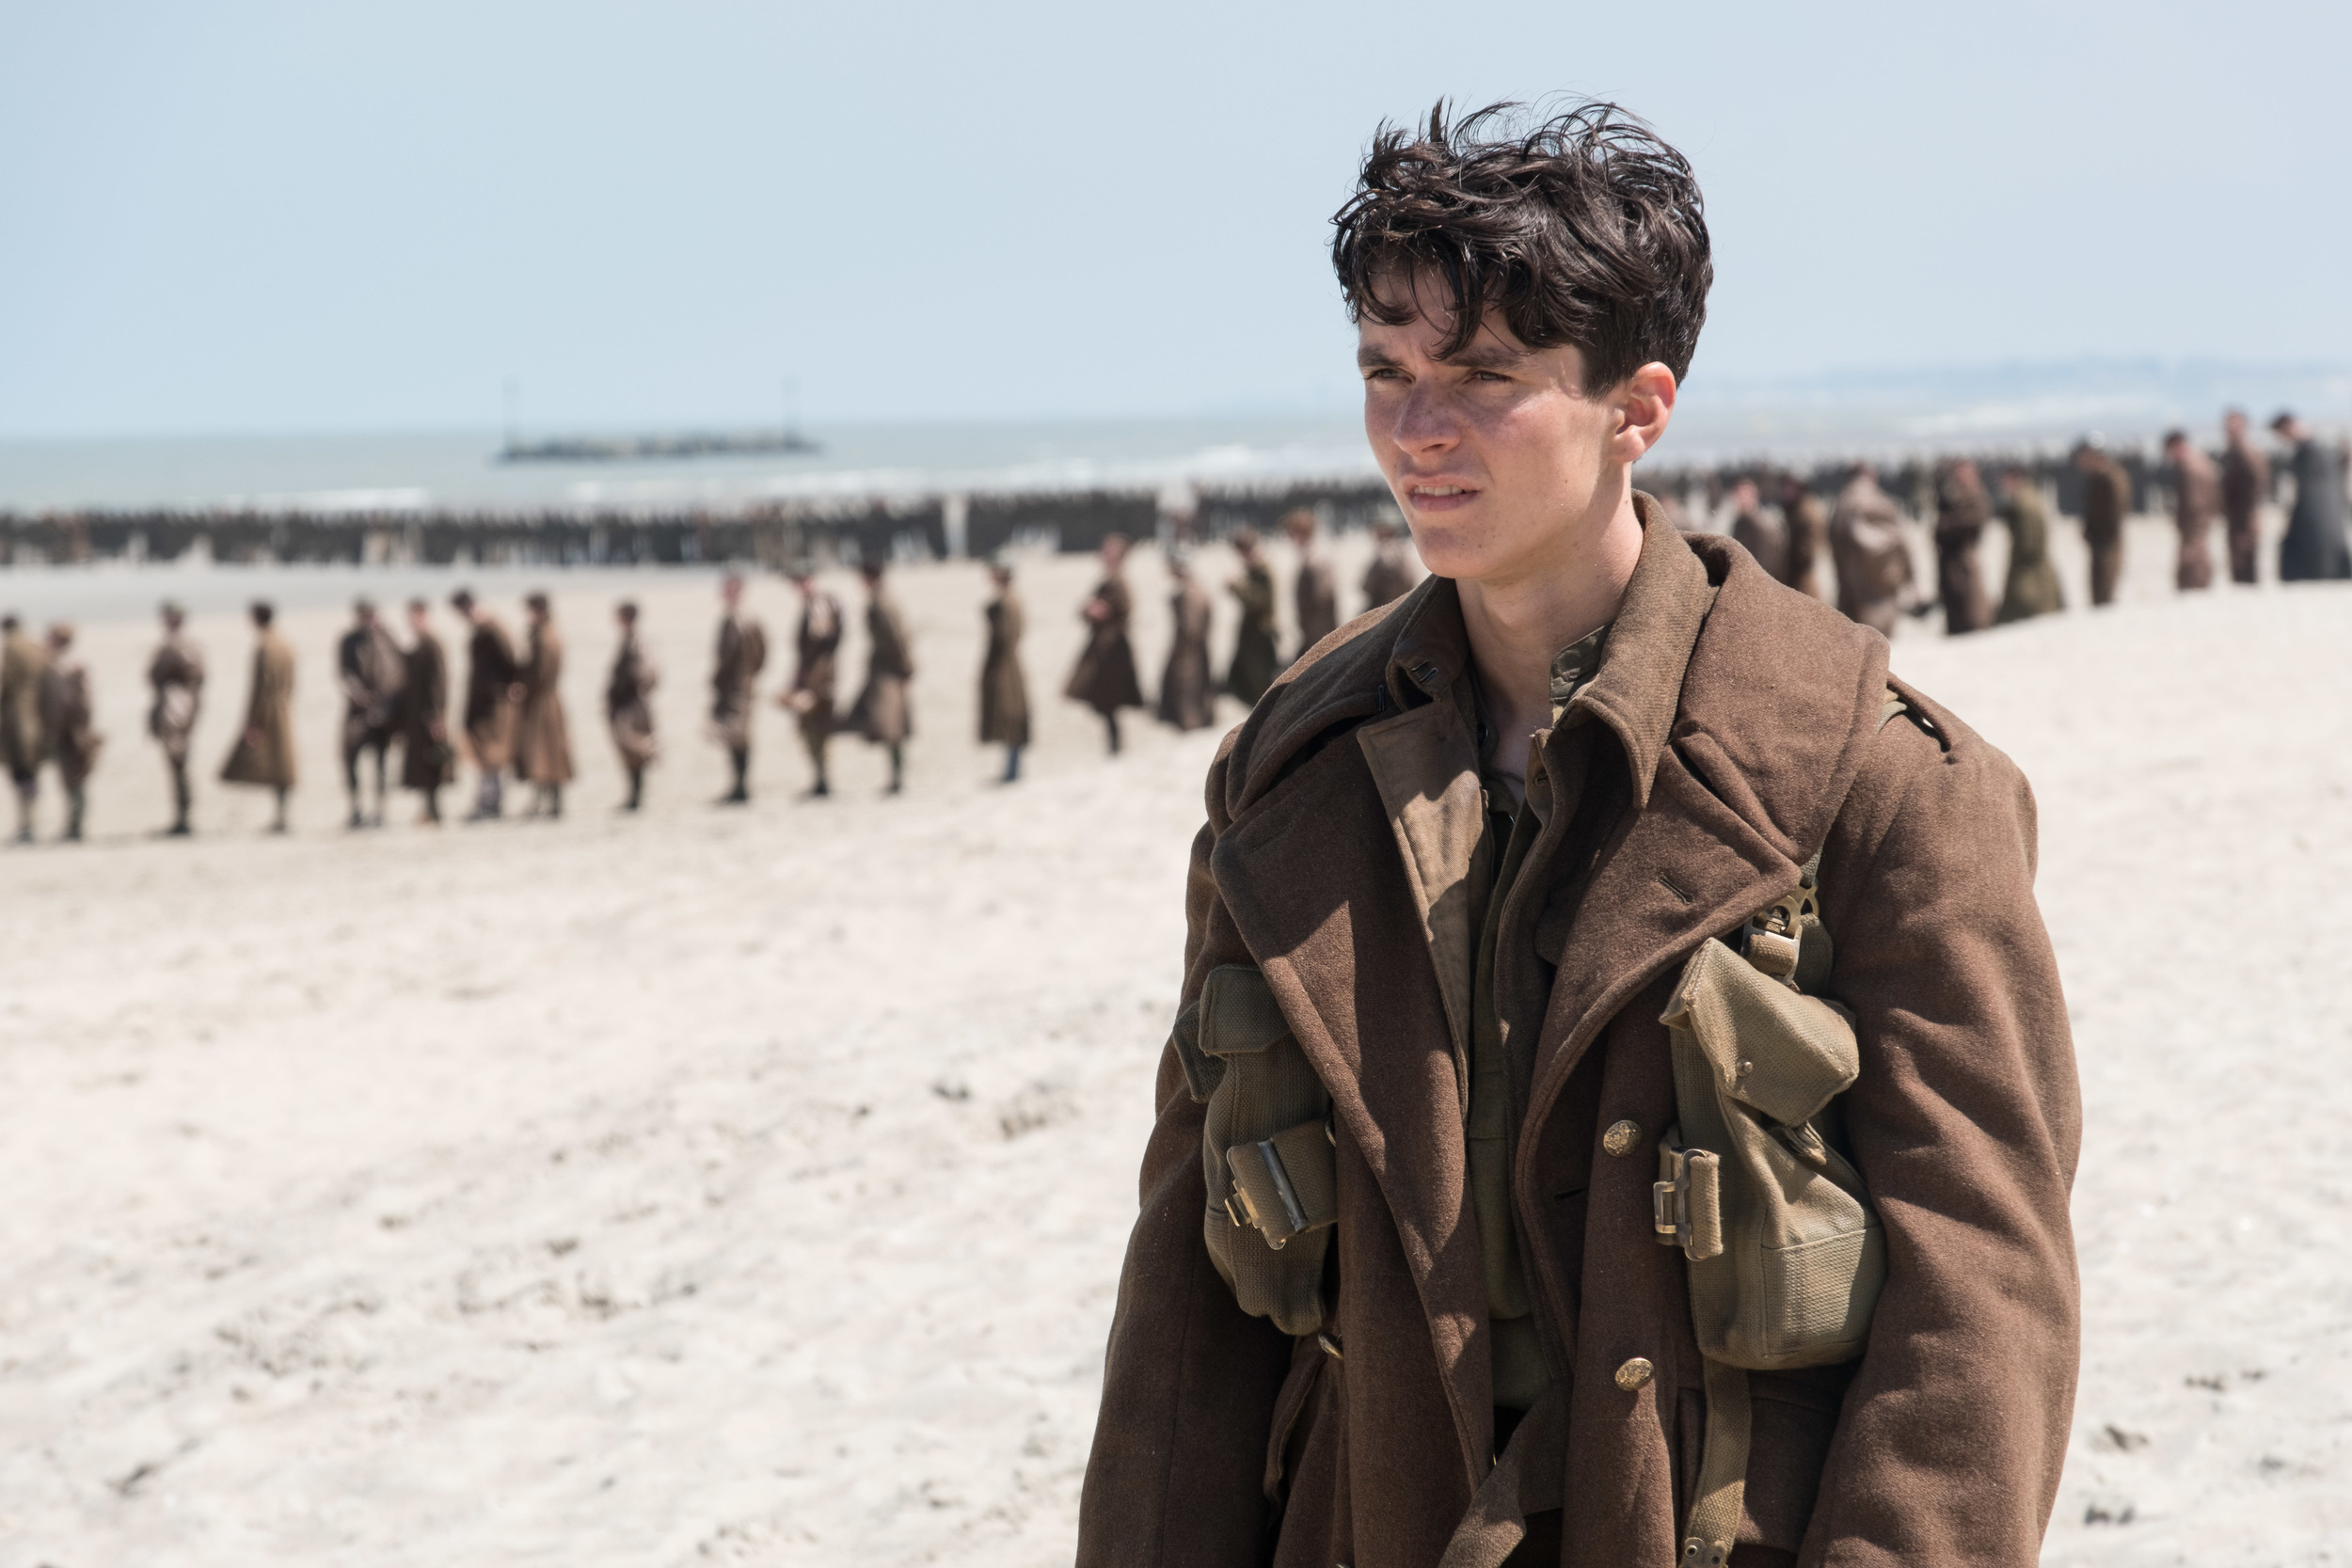 <p>Christopher Nolan knows how to direct a movie set in the mid-20th century. One of his most notable films to date, <em>Dunkirk</em> tells the amazing true story of the evacuation of the same name during World War II. The film was lauded for its mostly accurate portrayal of the events. </p><p><a href='https://www.msn.com/en-us/community/channel/vid-cj9pqbr0vn9in2b6ddcd8sfgpfq6x6utp44fssrv6mc2gtybw0us'>Follow us on MSN to see more of our exclusive entertainment content.</a></p>